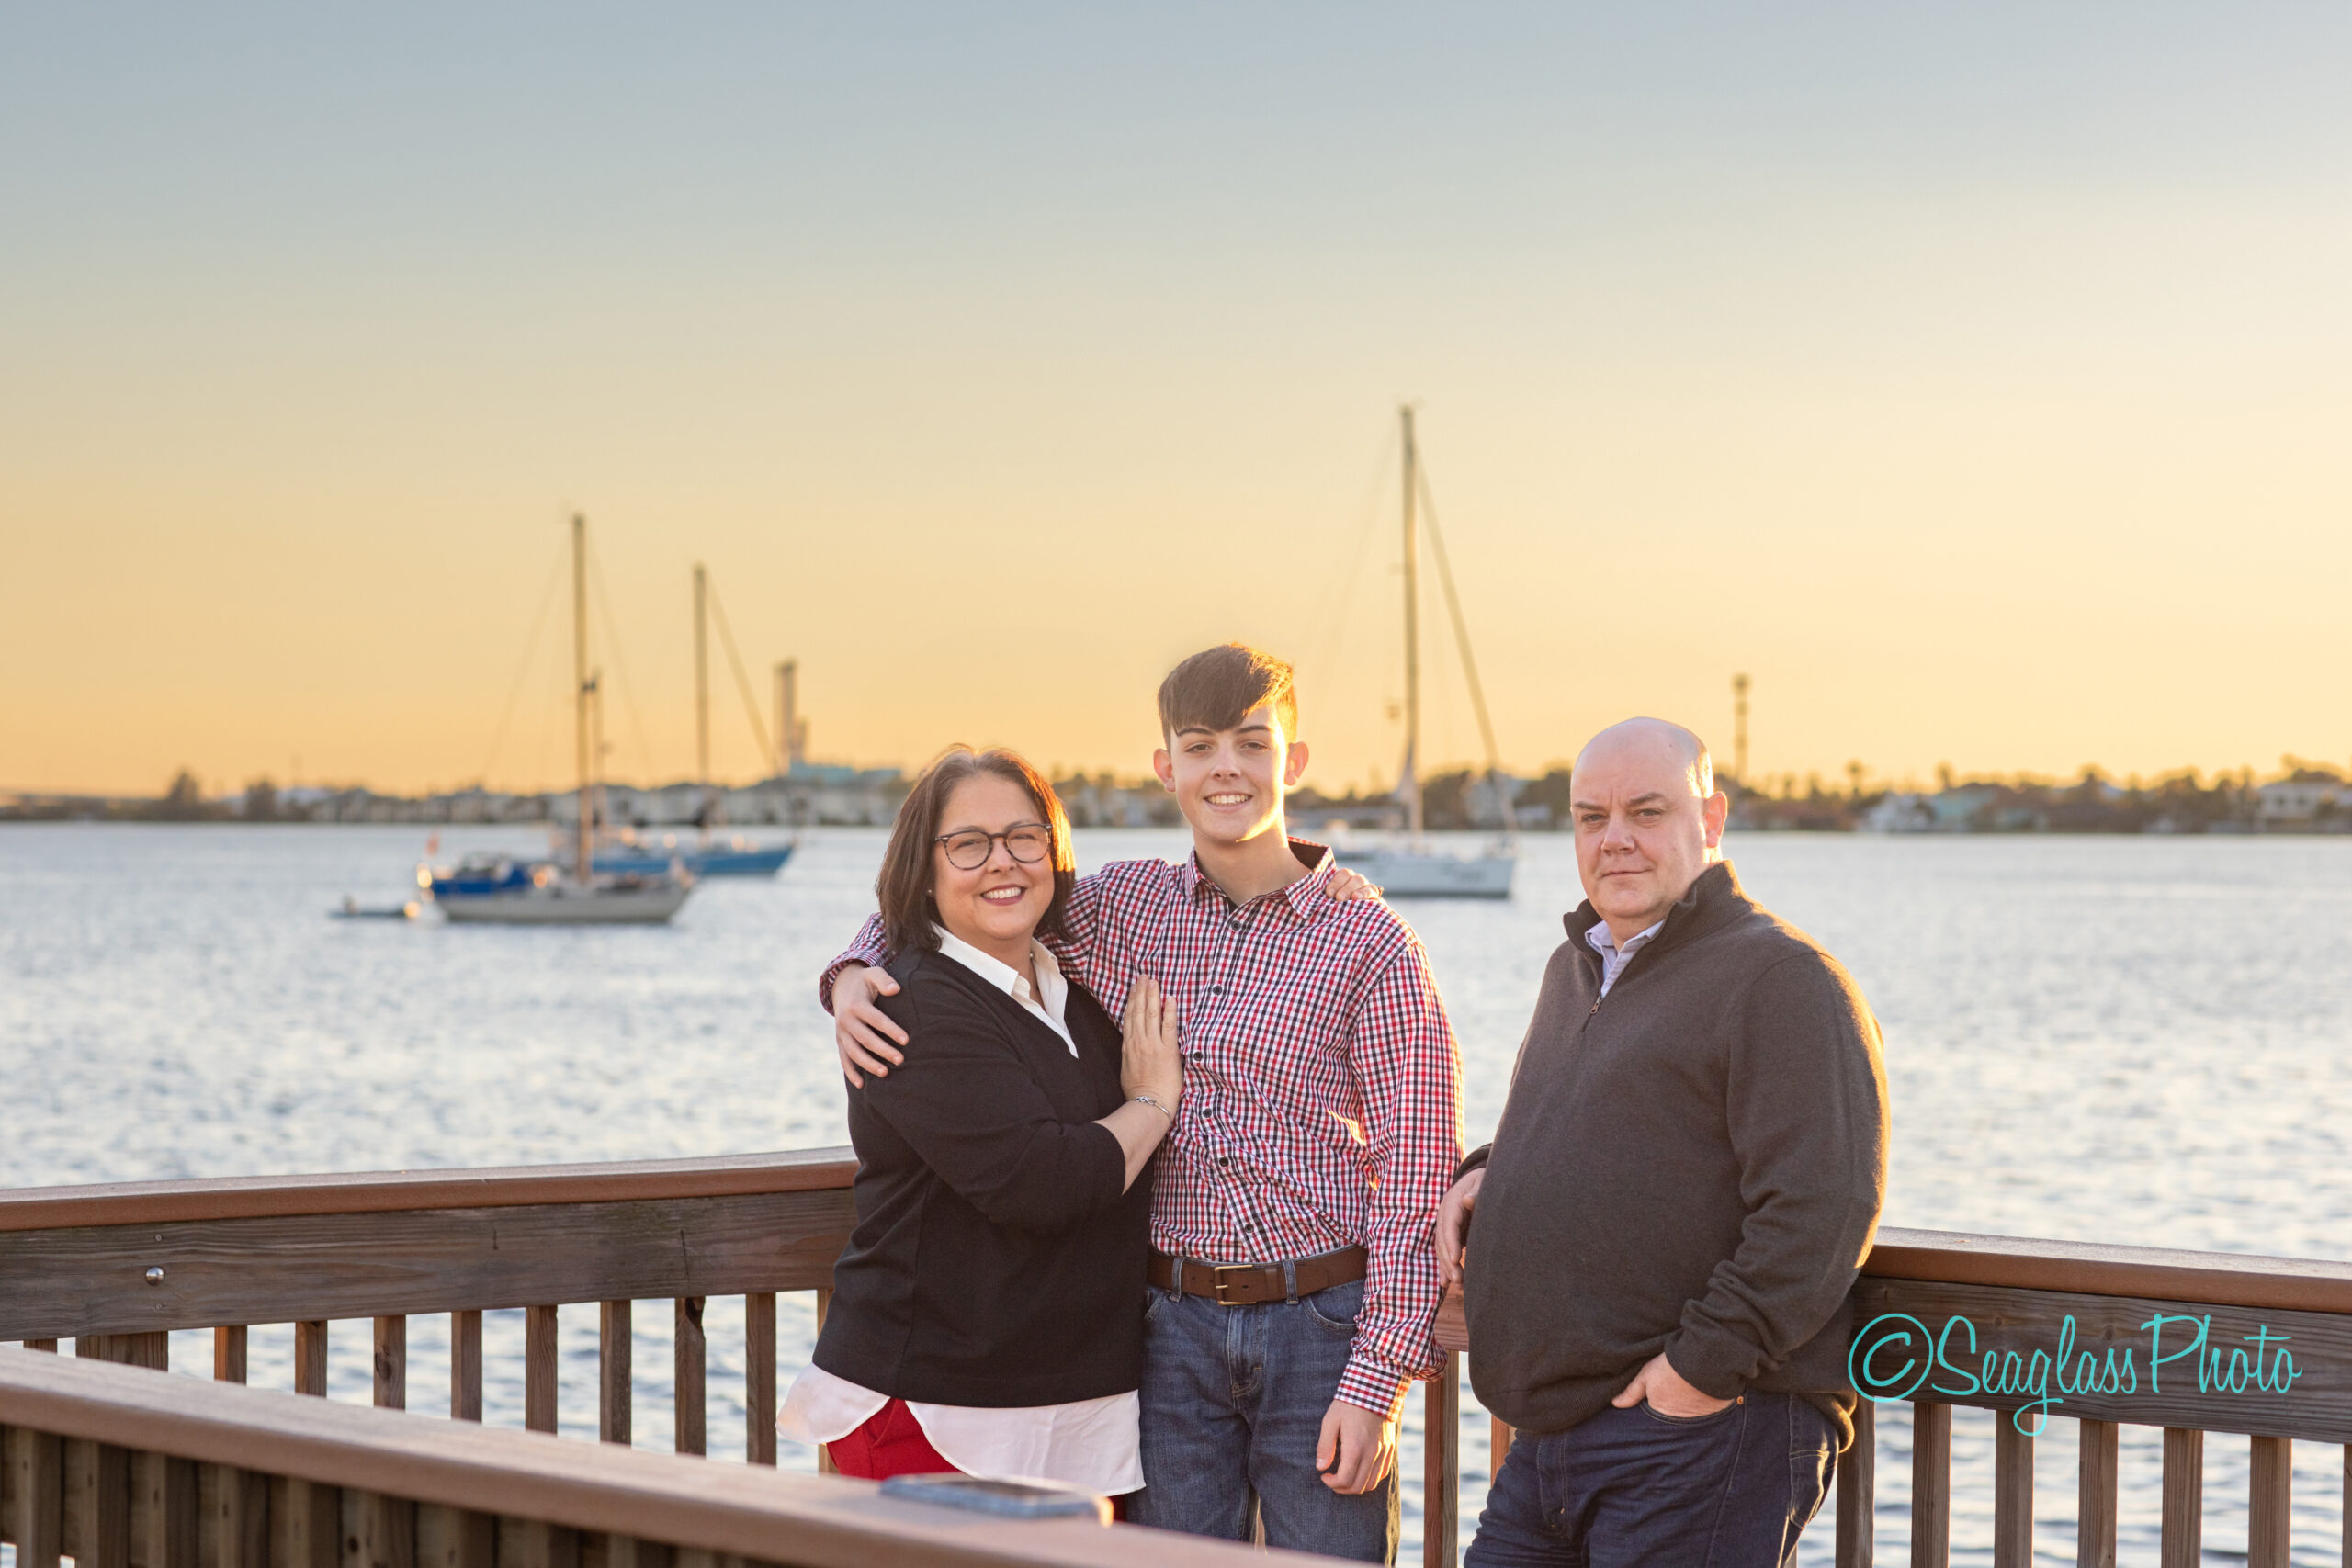 Beautiful sunset portrait of a Vero Beach family by the Indian River with sailboats in the background